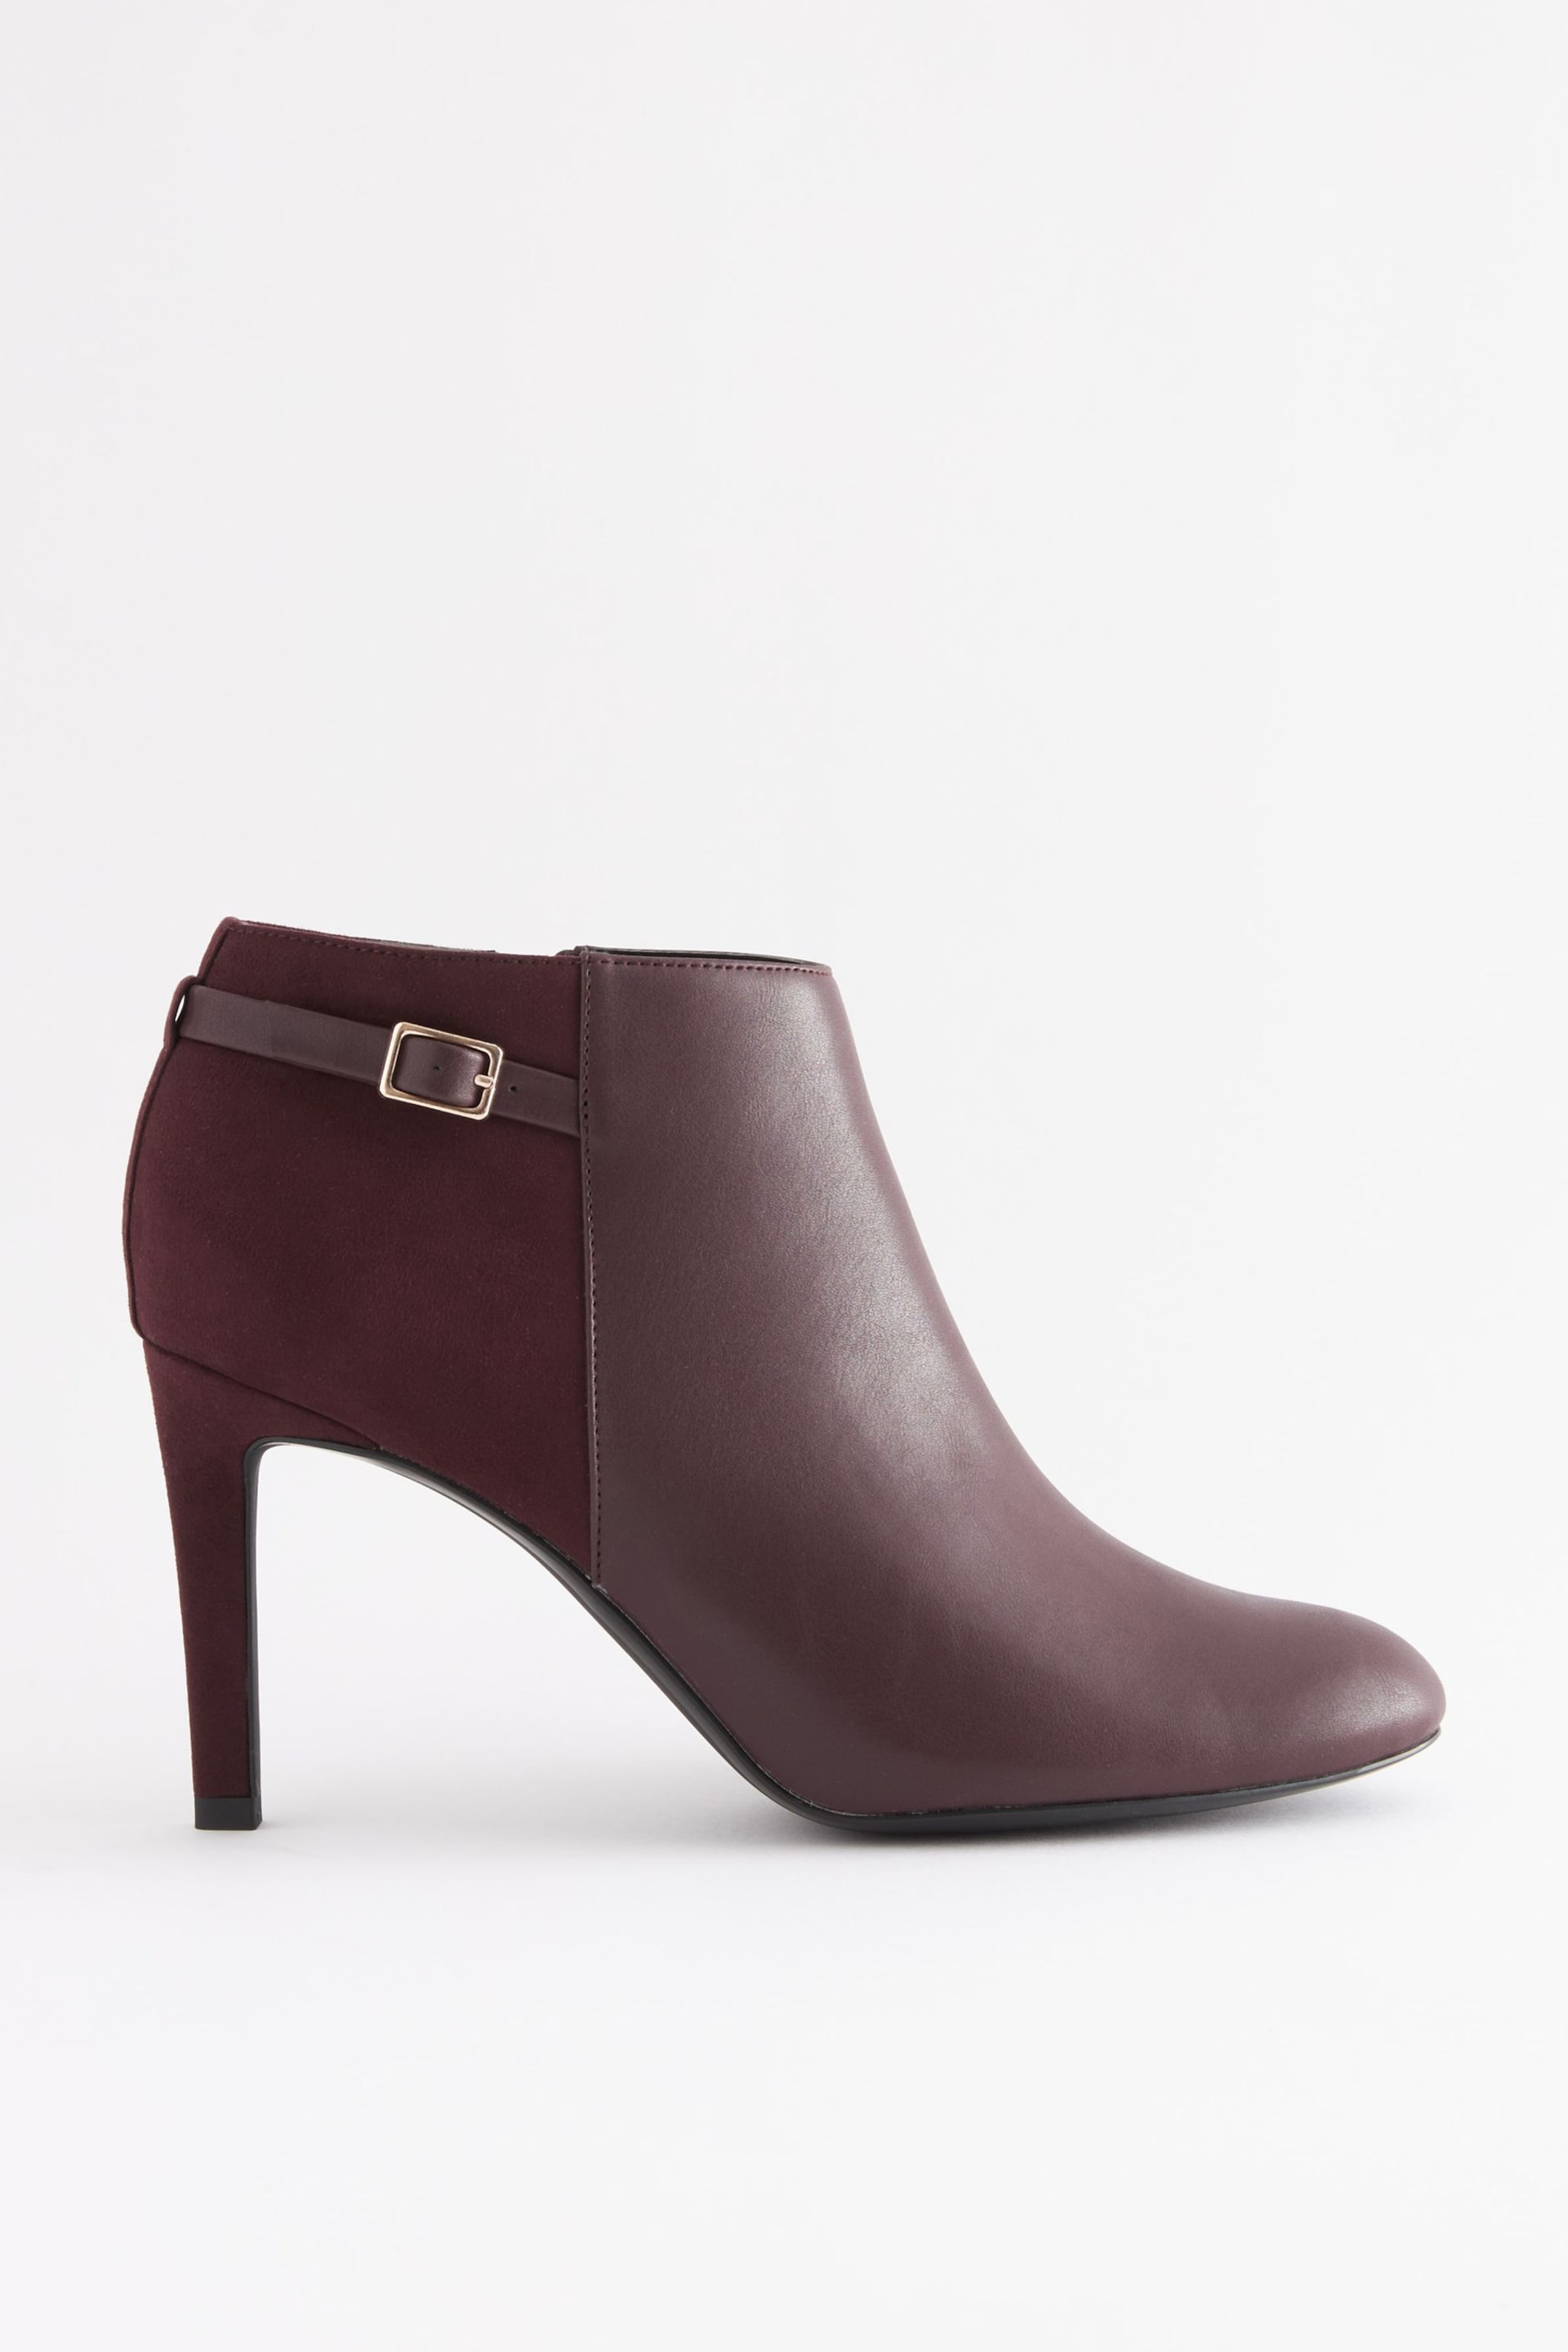 Burgundy Red Forever Comfort® Round Toe Shoe Boots - Image 4 of 7